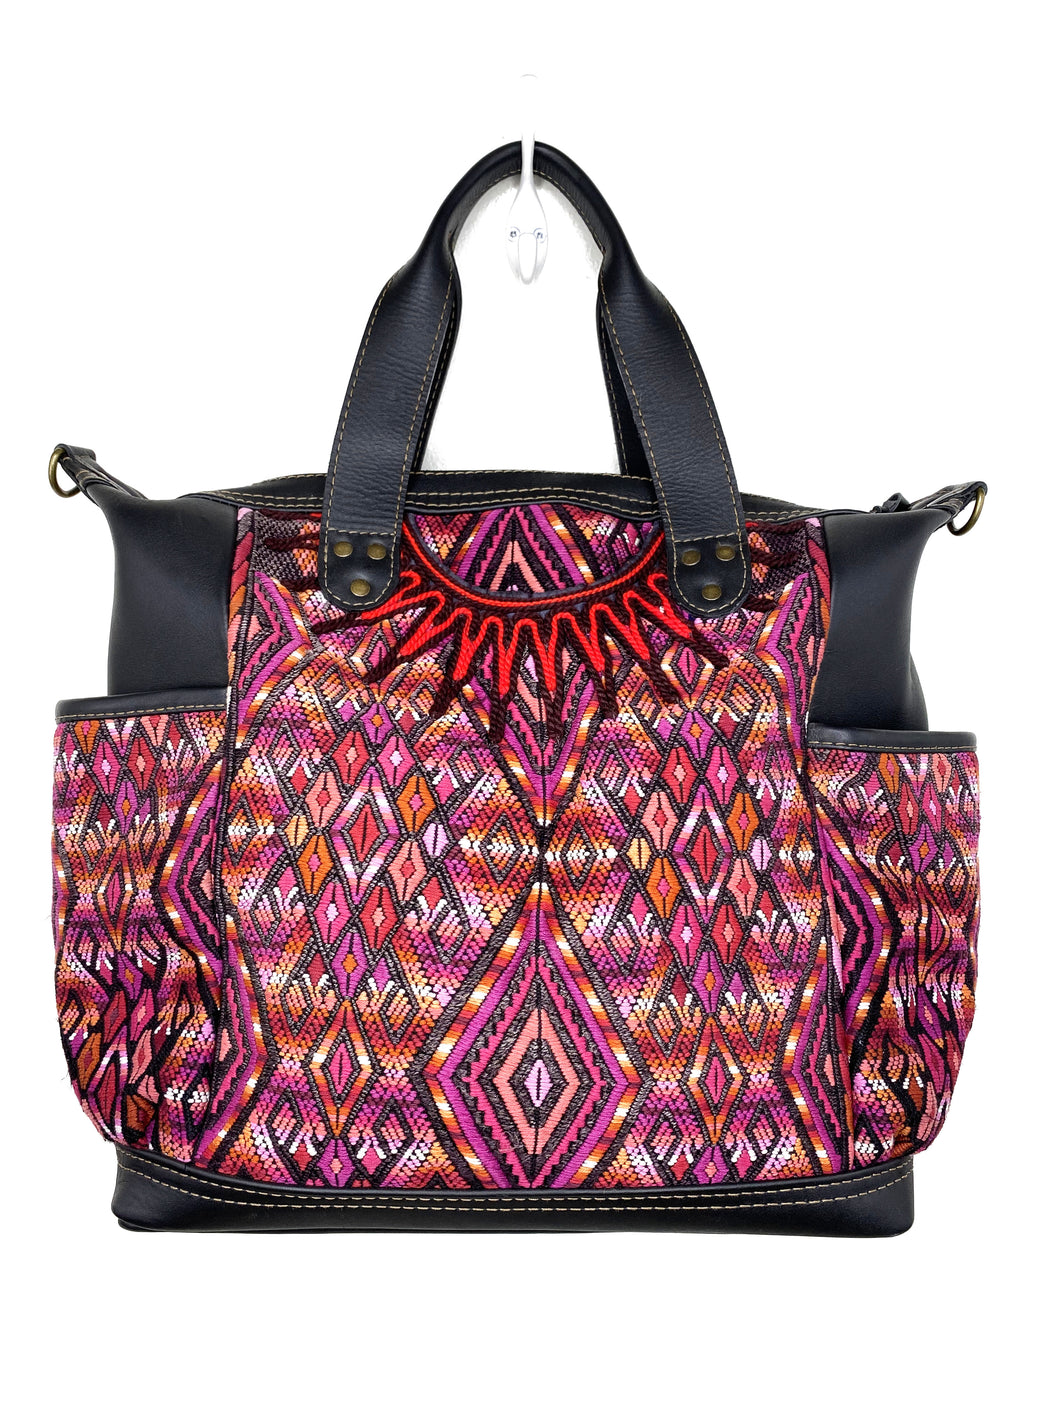 MoonLake Designs handmade Gabriella Large Convertible Day Bag in Black Leather with textile pocket and multi-color handwoven huipil design in warm colors